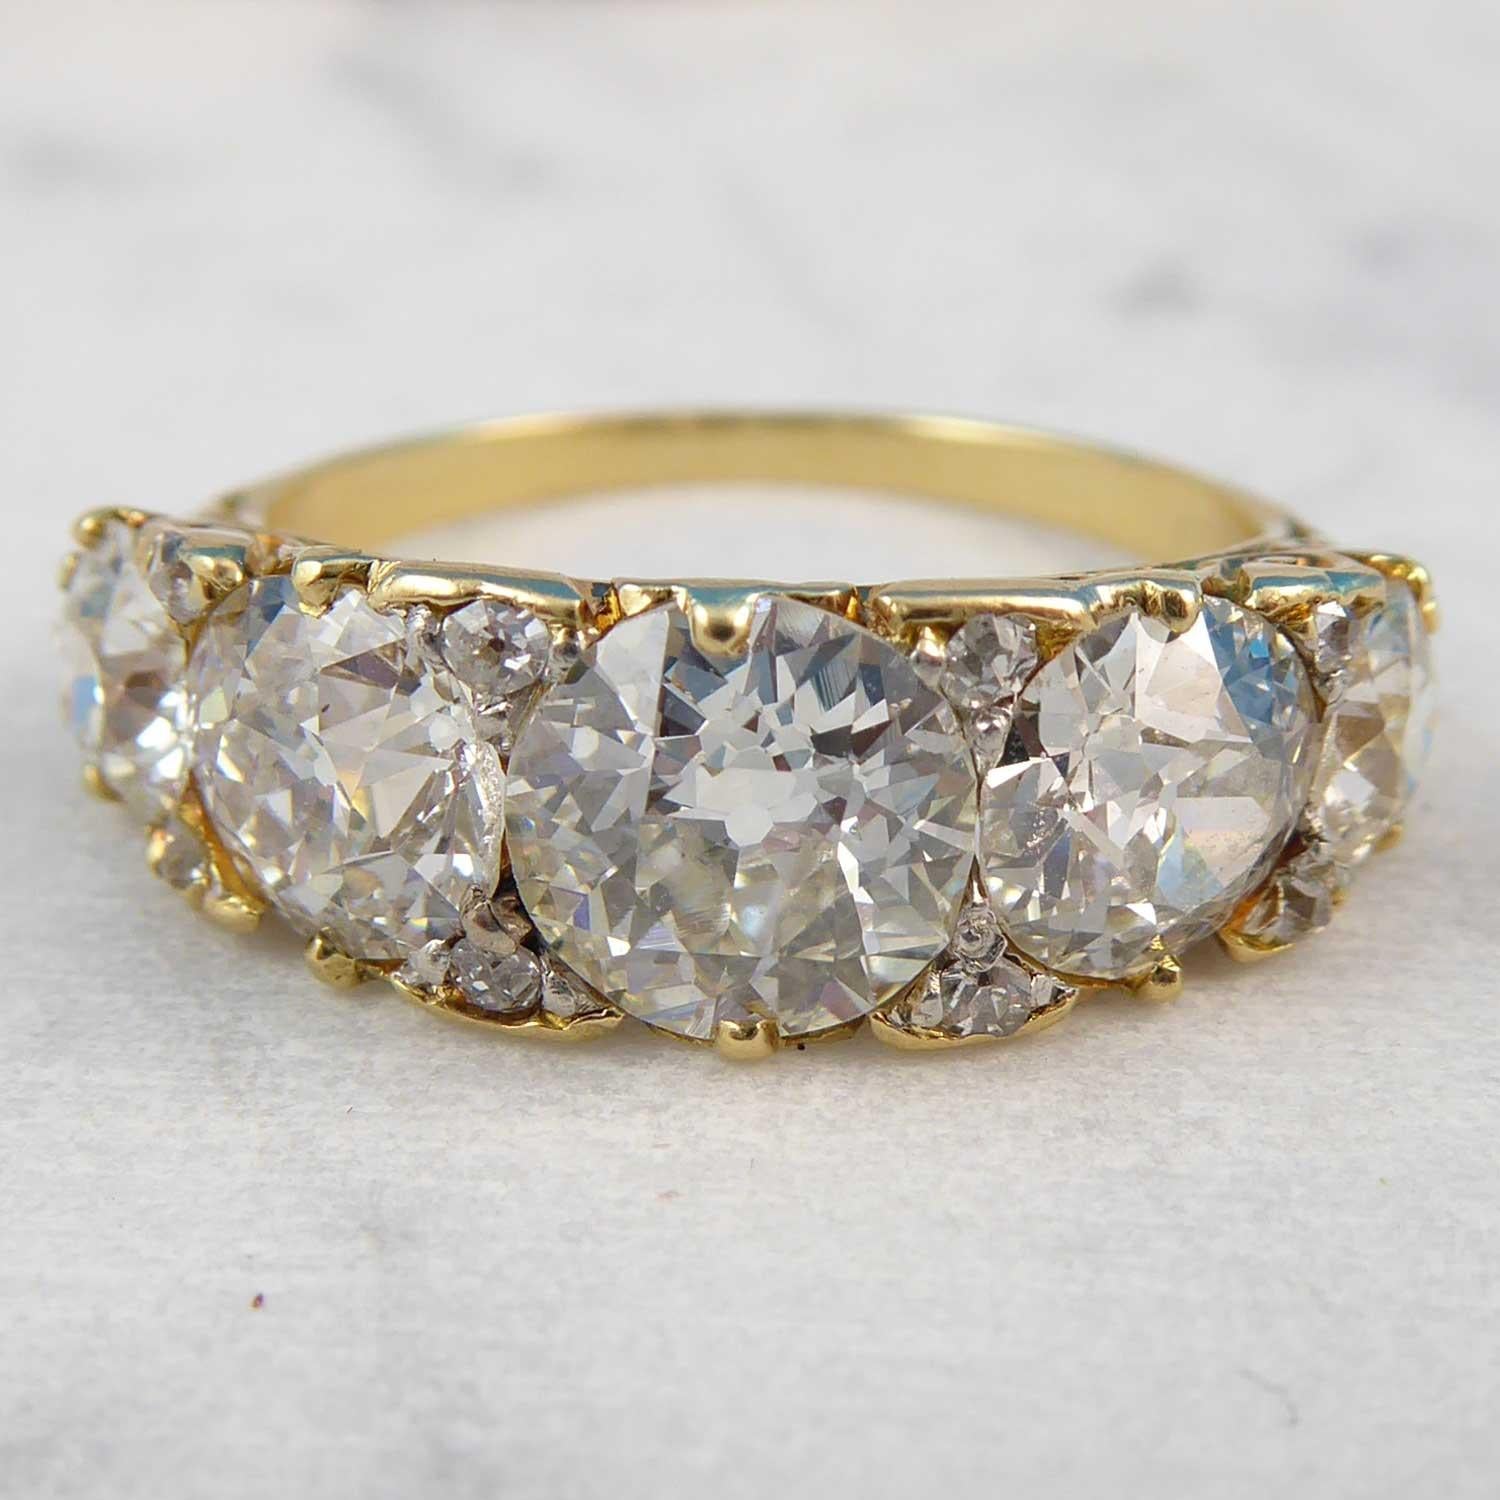 A Victorian diamond set five stone ring comprising five graduating old European cut diamonds measuring from 6.70mm diameter to 4.55mm diameter, claw set to a yellow boat shpaed head.  Beteween each of the main diamonds are a pair of claw set old